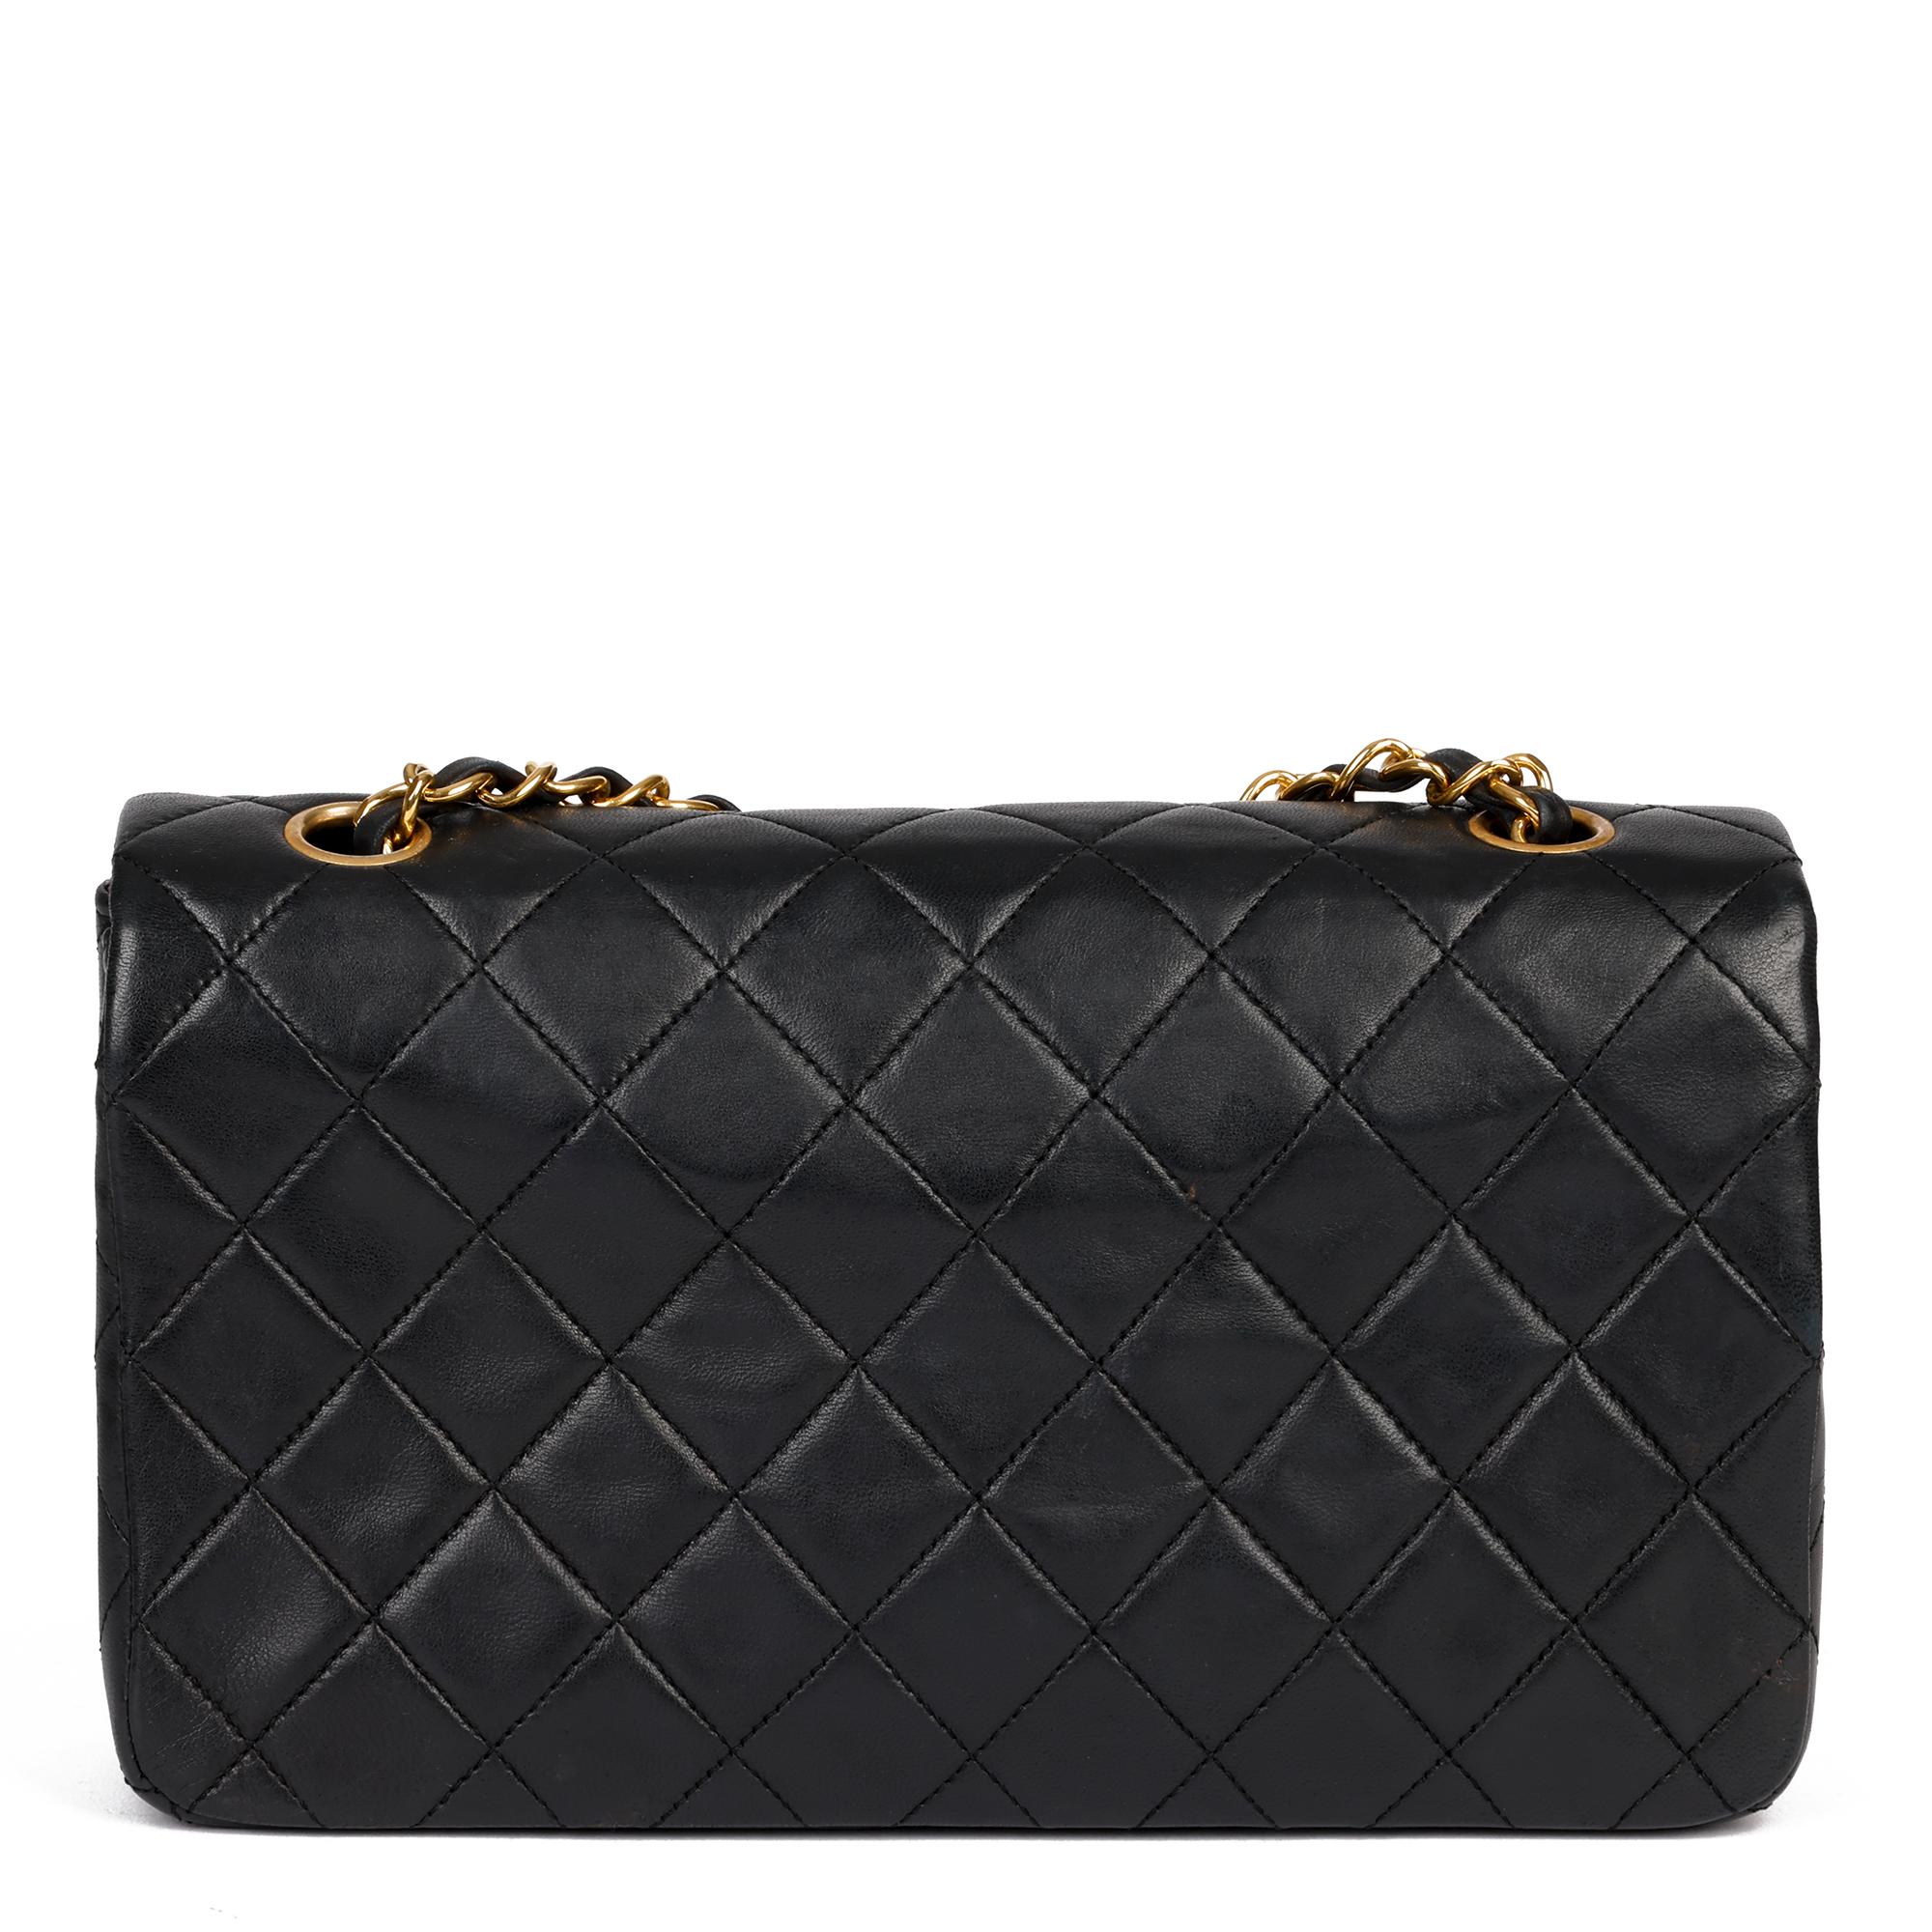 1991 Chanel Black Quilted Lambskin Leather Vintage Classic Single Full Flap Bag  1